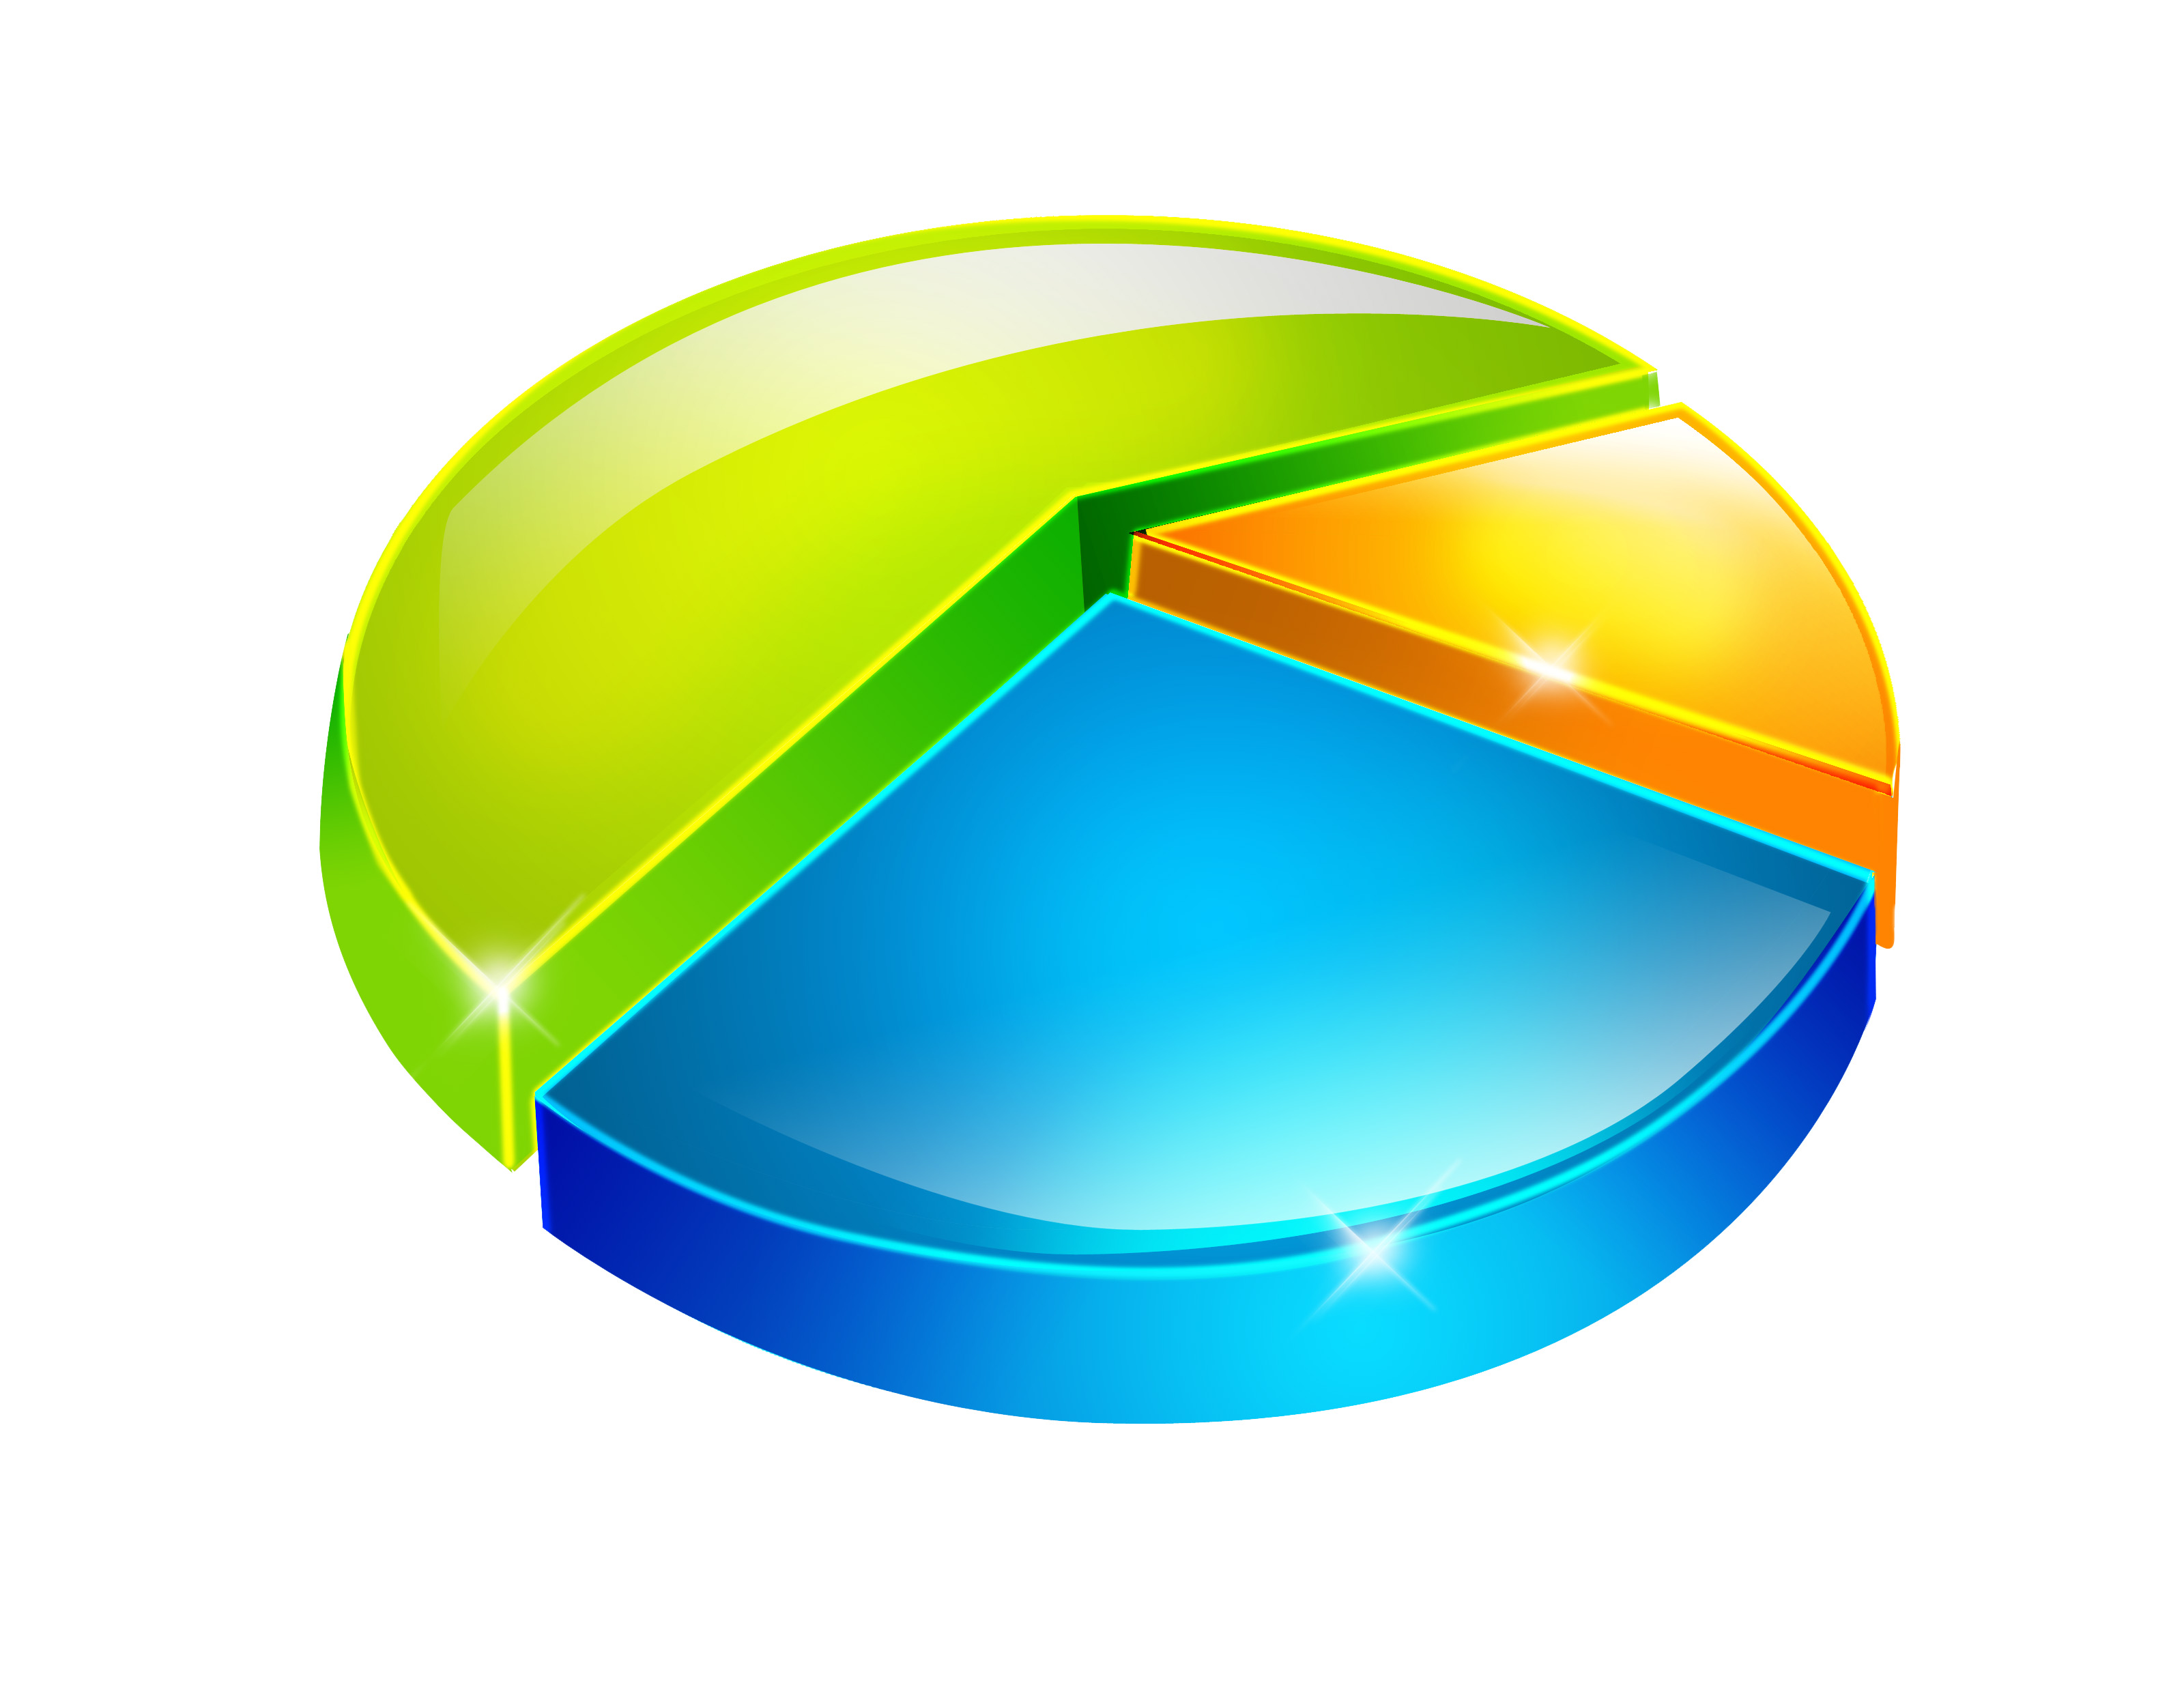 Free Pie Chart Cliparts Download Free Pie Chart Cliparts Png Images